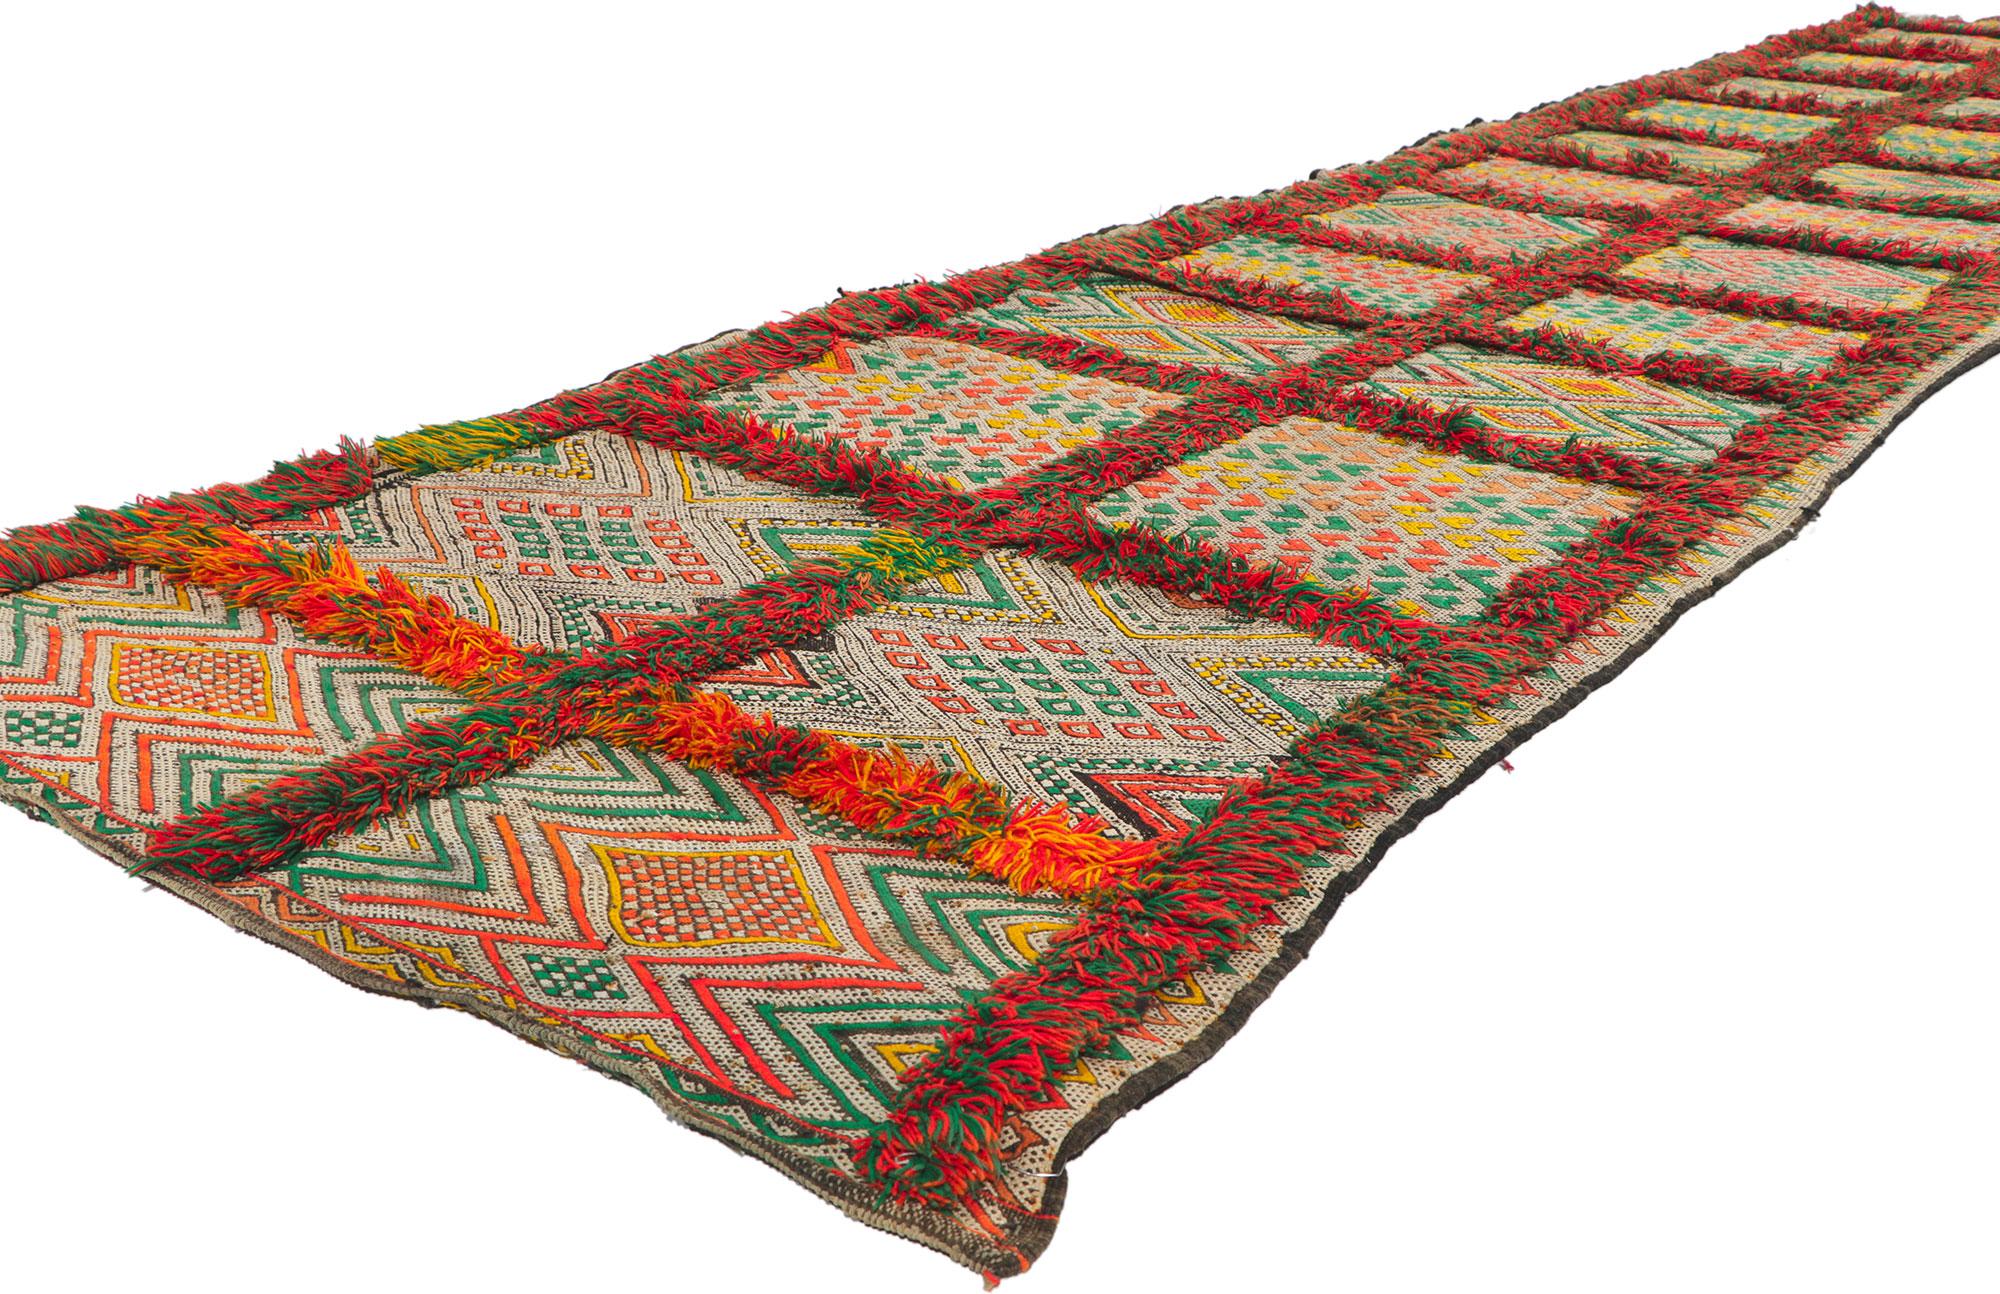 21708 Vintage Zemmour Moroccan Kilim Runner, 03'02 x 14'05. Full of tiny details and tribal style, this hand-woven wool vintage Zemmour Berber Moroccan kilim rug runner is a captivating vision of woven beauty. The abrashed field is composed of